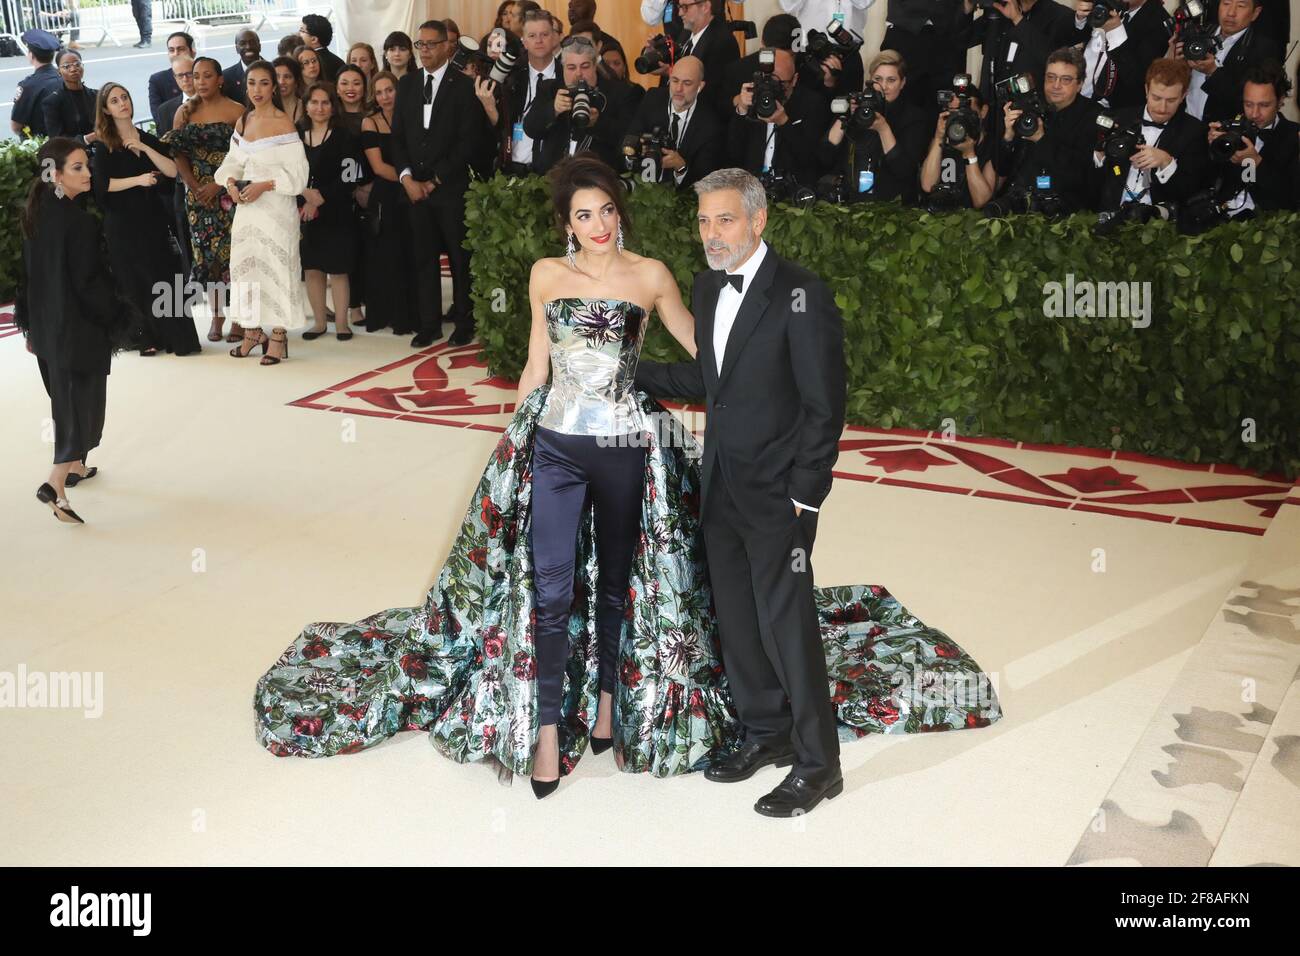 Amal Clooney, George Clooney arrives to the 2018 Met Costume Gala Heavenly Bodies, held at the Metropolitan Museum of Art in New York City, Monday, May 7, 2018. Photo by Jennifer Graylock-Graylock.com 917-519-7666 Stock Photo